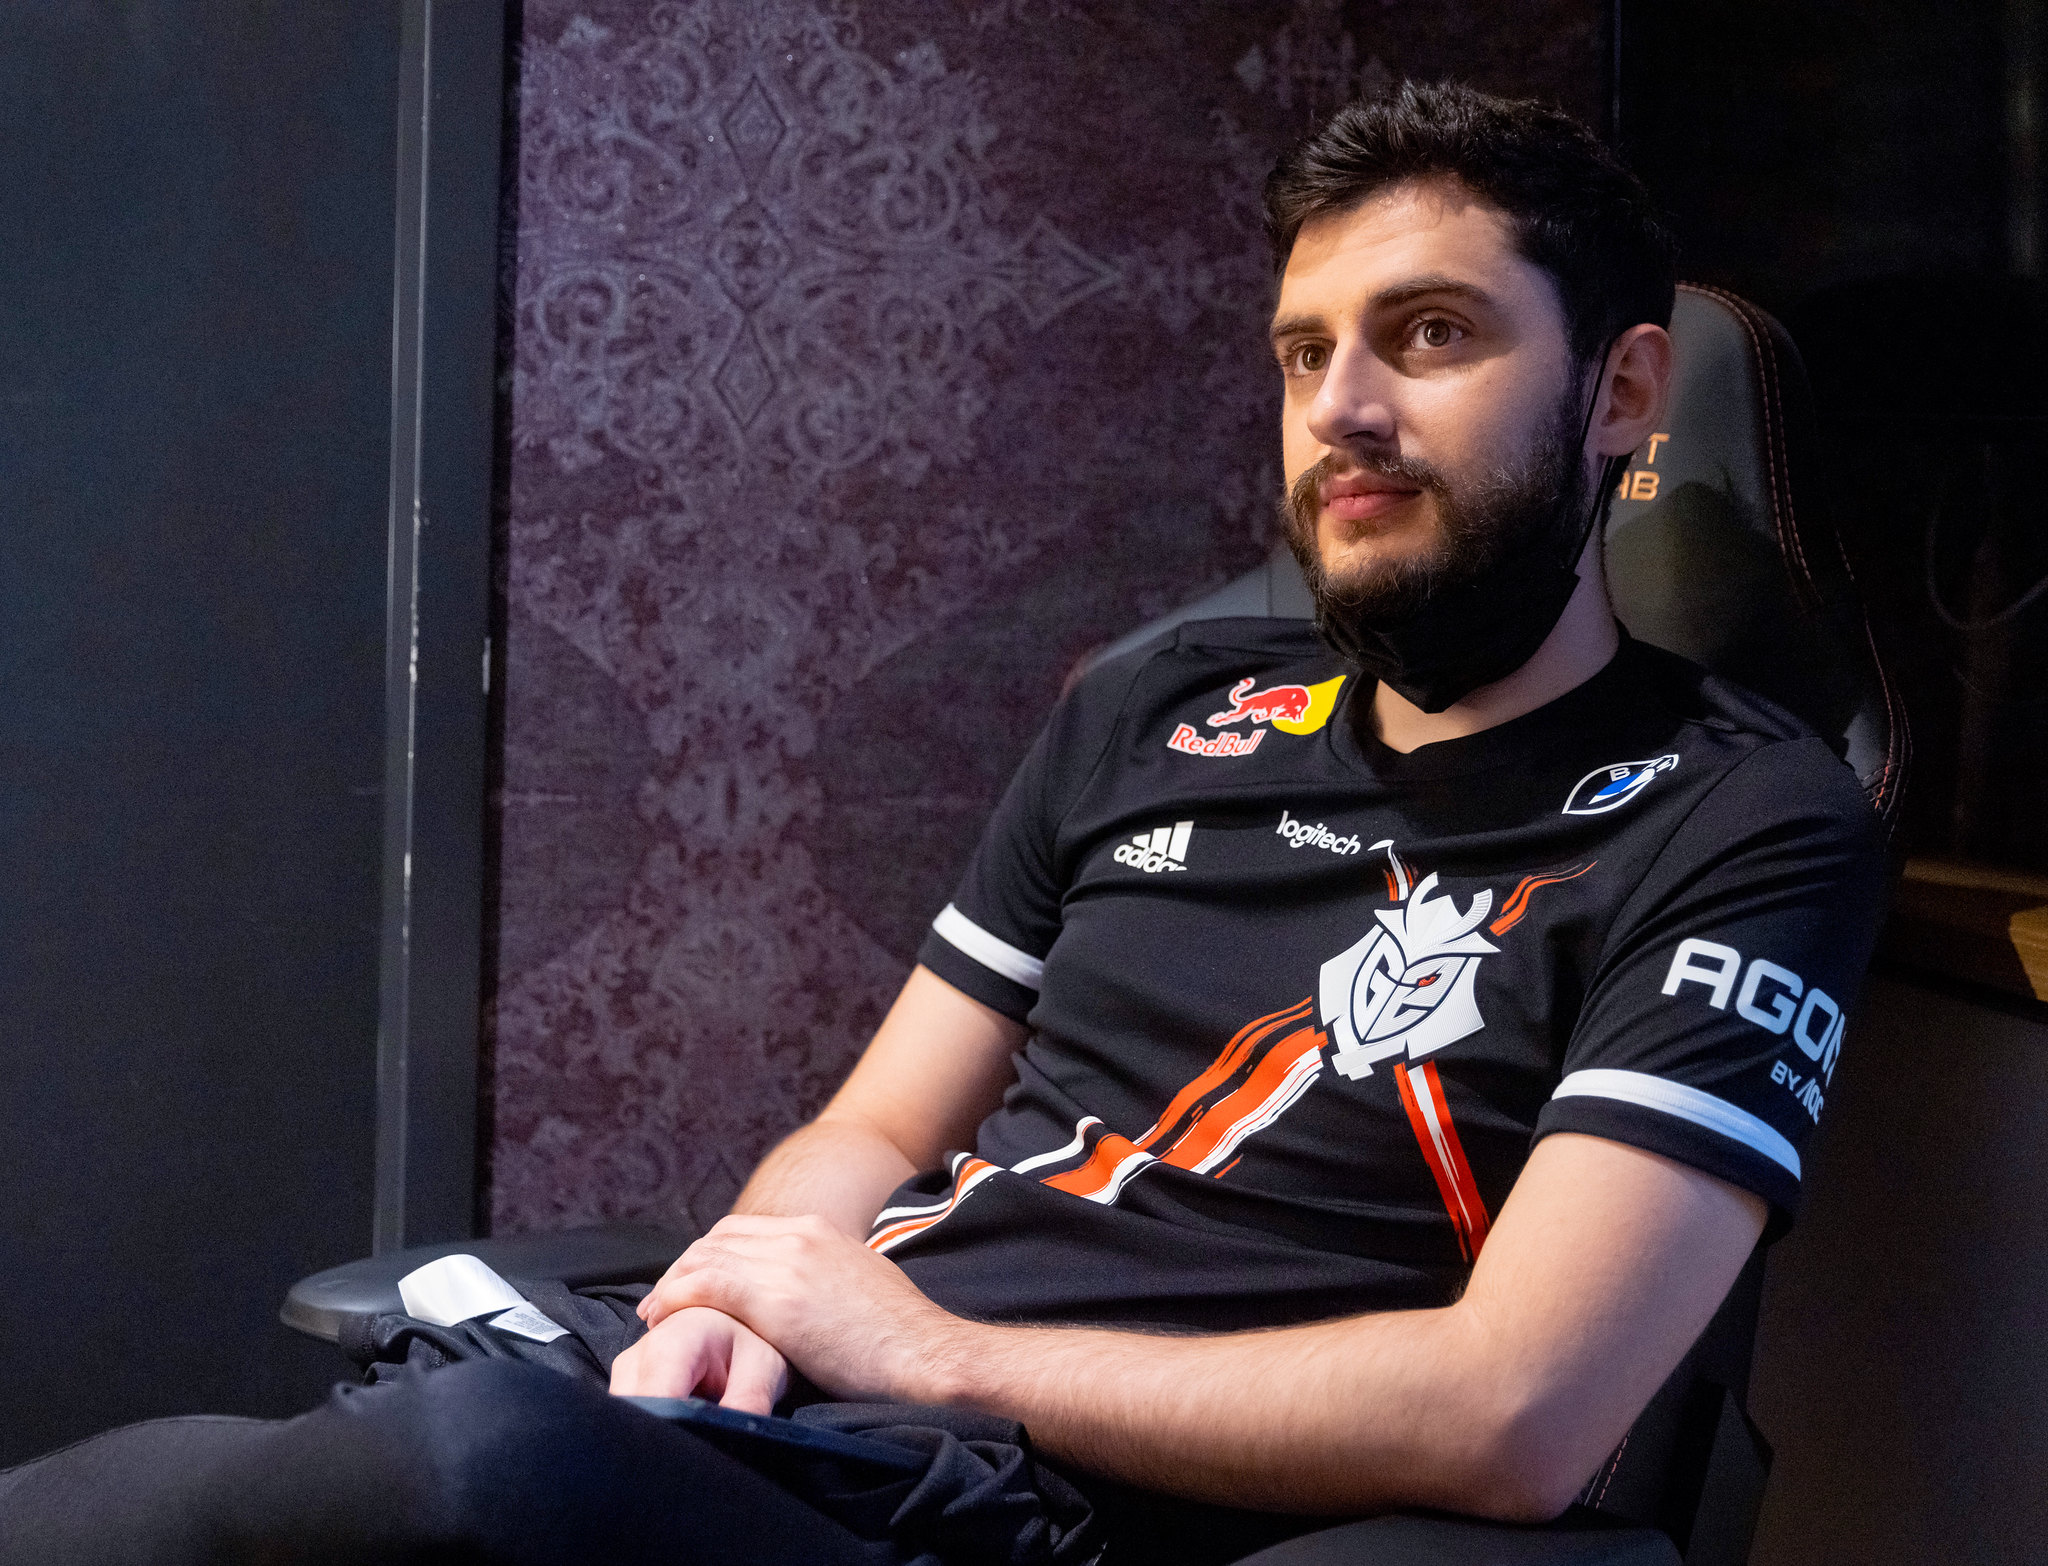 Mixwell, former G2 captain in VALORANT